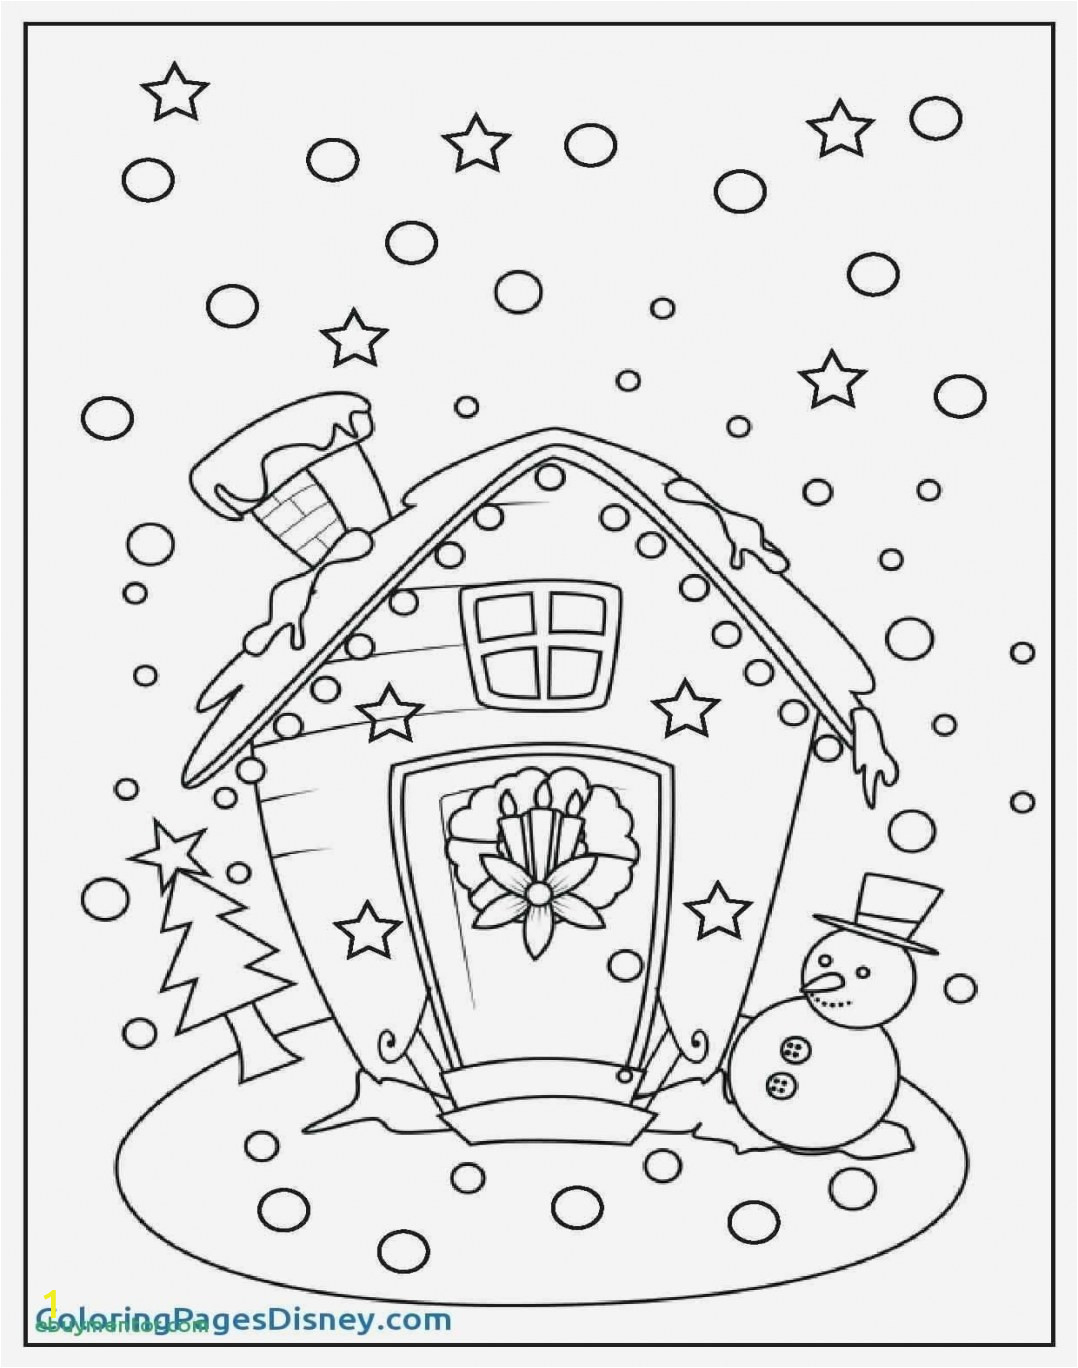 Trash Can Coloring Page Outdoor Merry Christmas Sign Merry Christmas Card Coloring